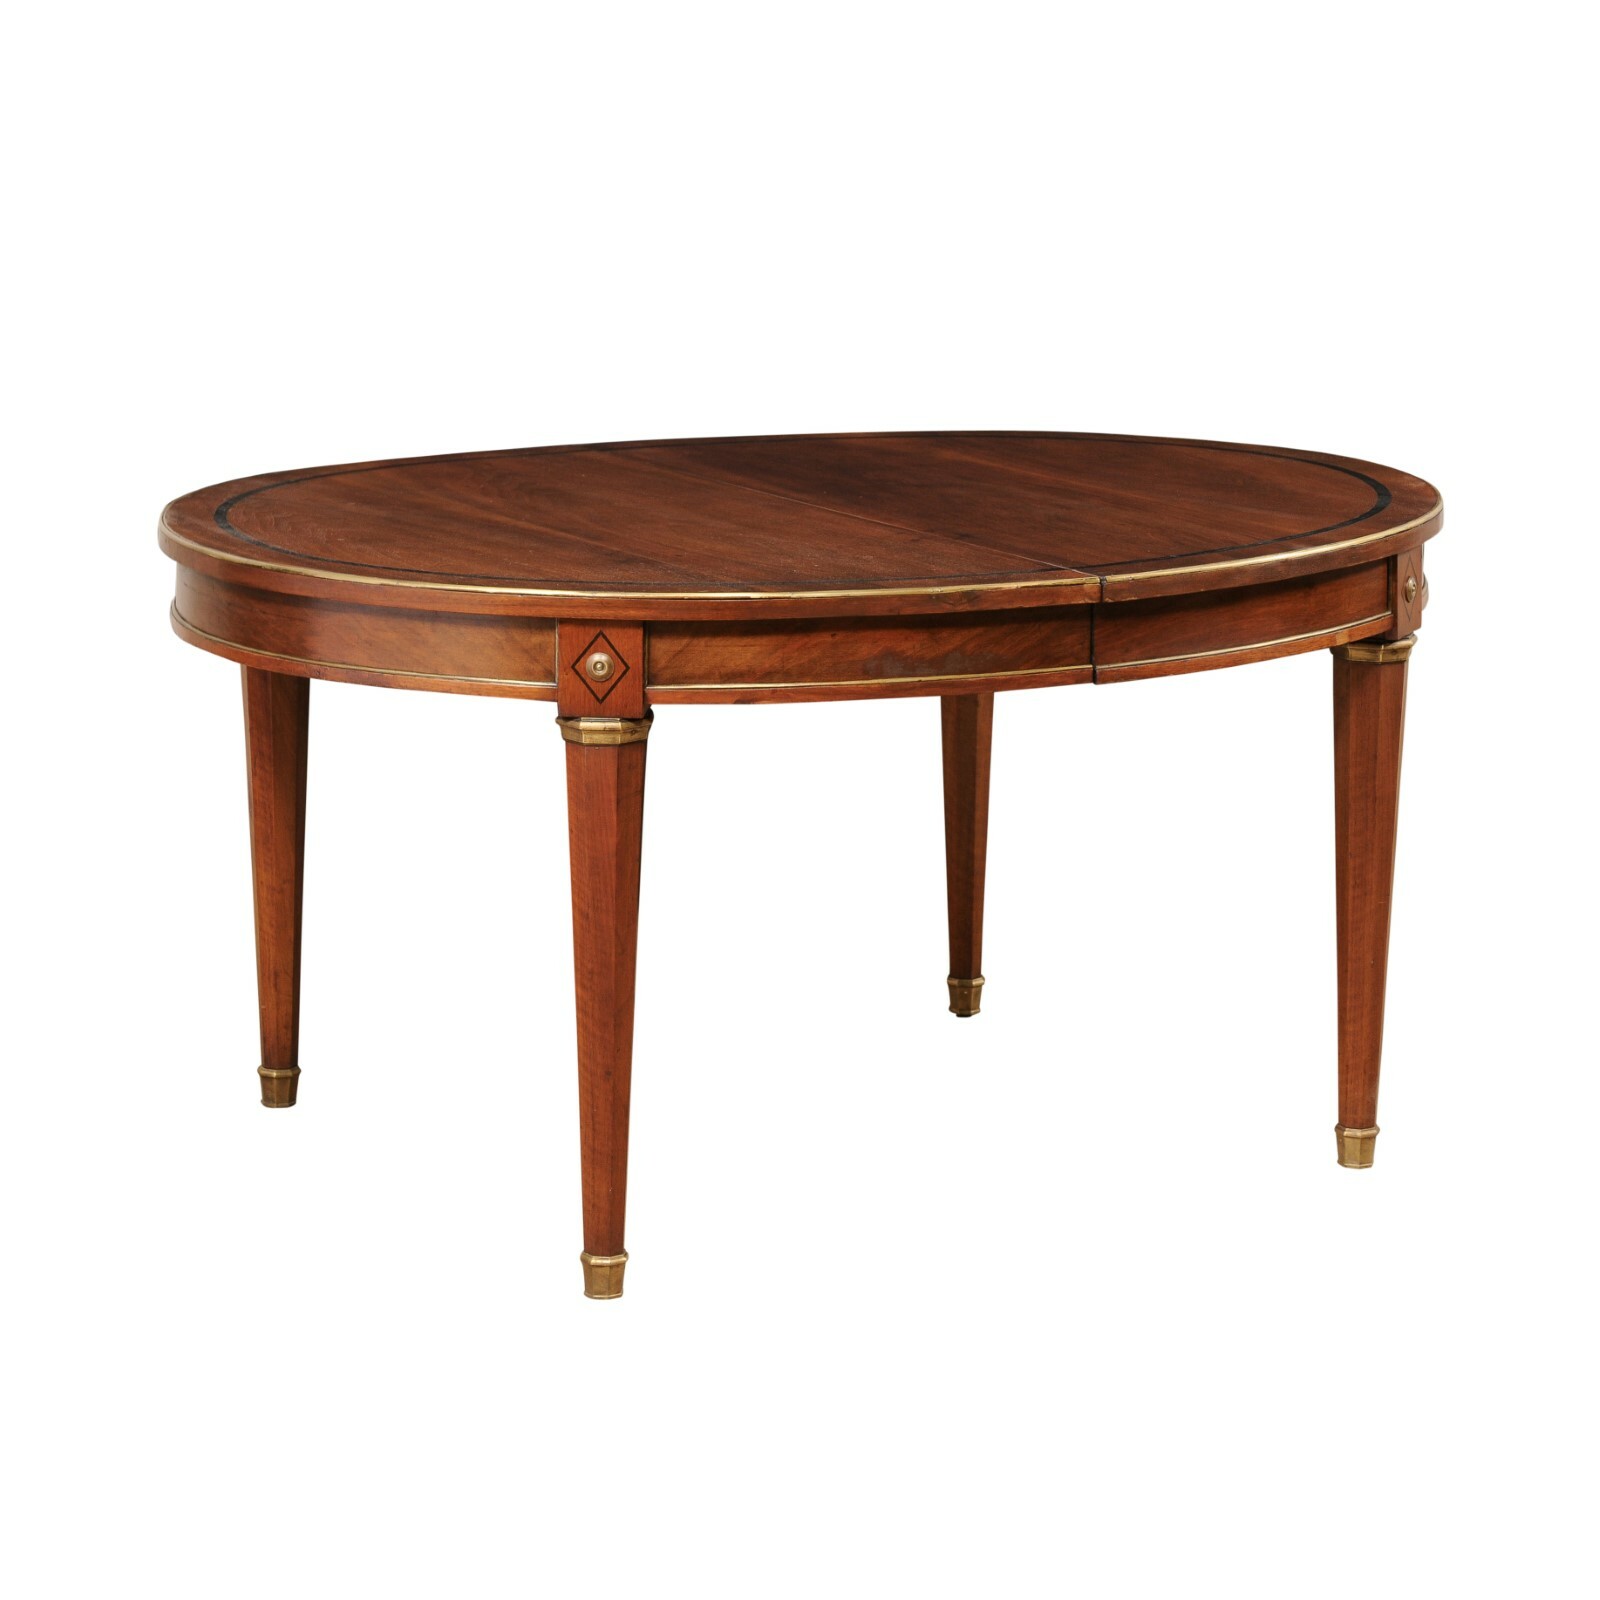 French Neoclassic Style Oval Table w/Leaf